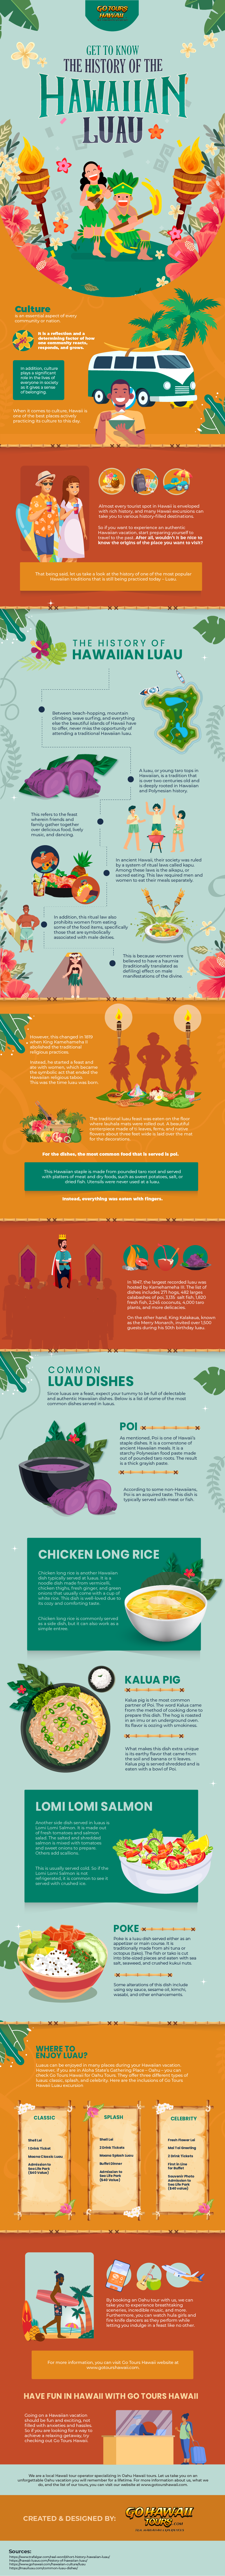 Get_to_know_the_history_of_the_Hawaiian_Luau_infographic_image